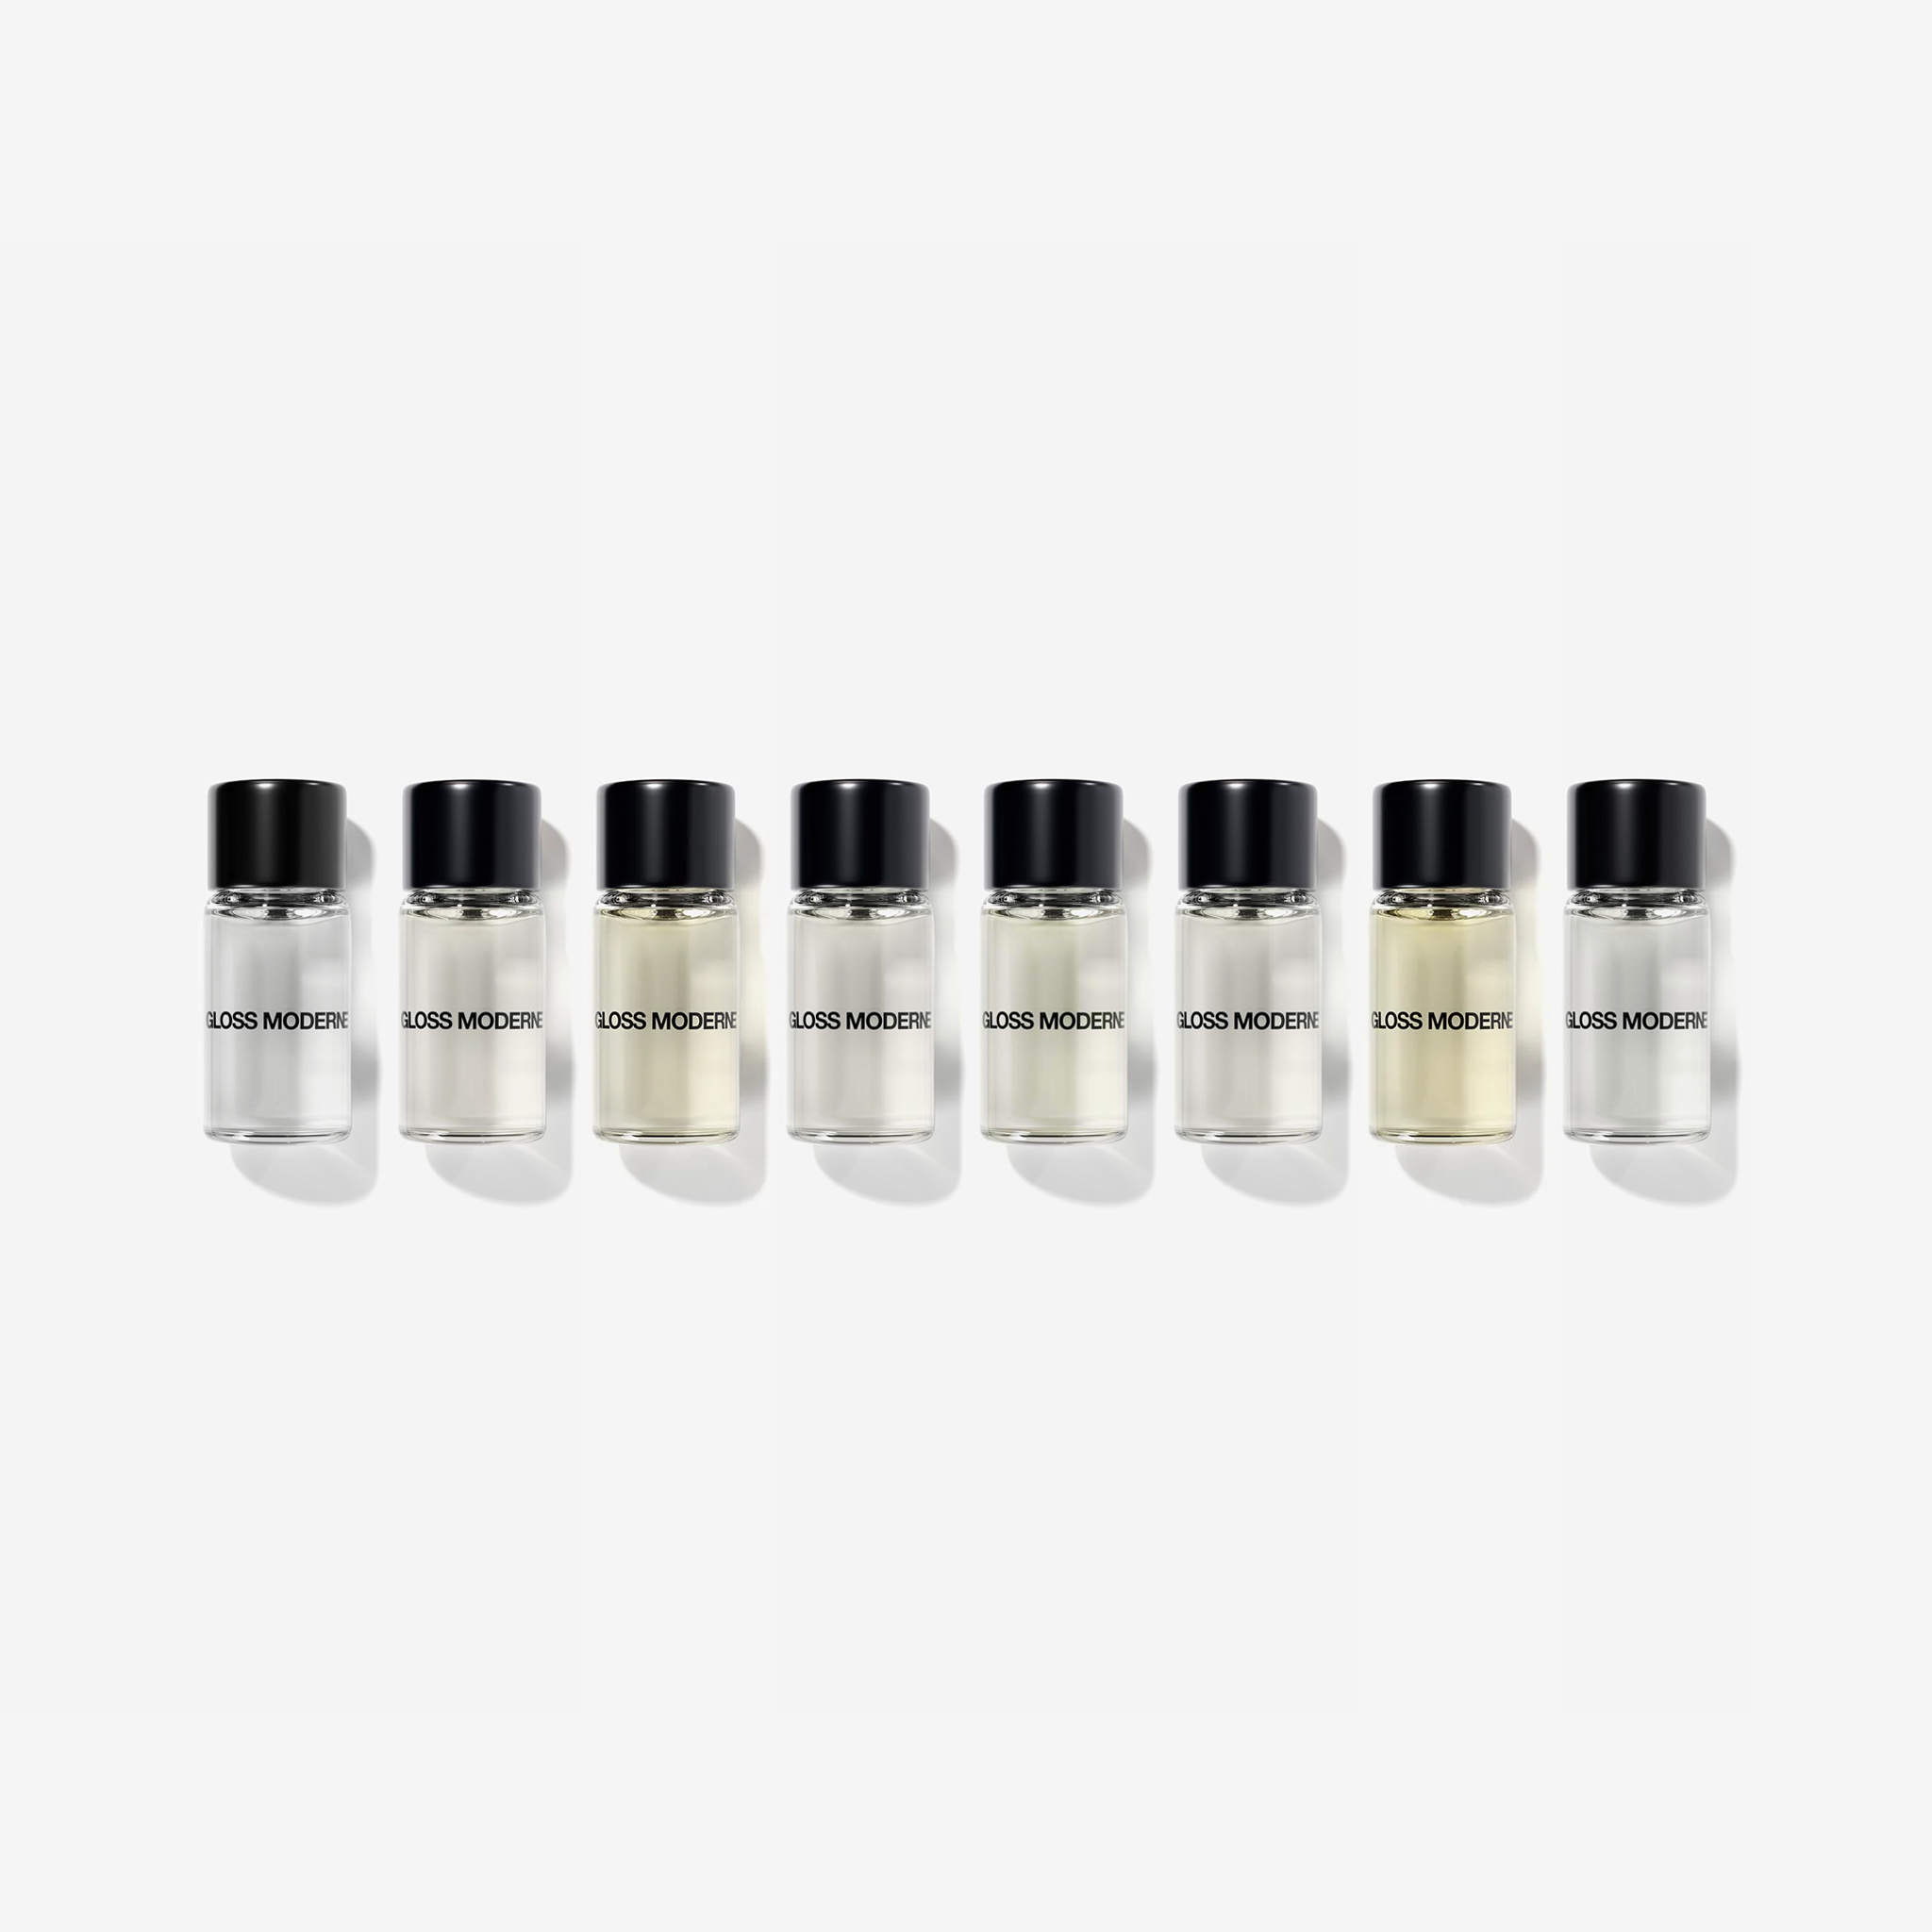 Candle Fragrance Oil Discovery Set No.1 - 6 bottles of 15 ml Luxurious  Scents